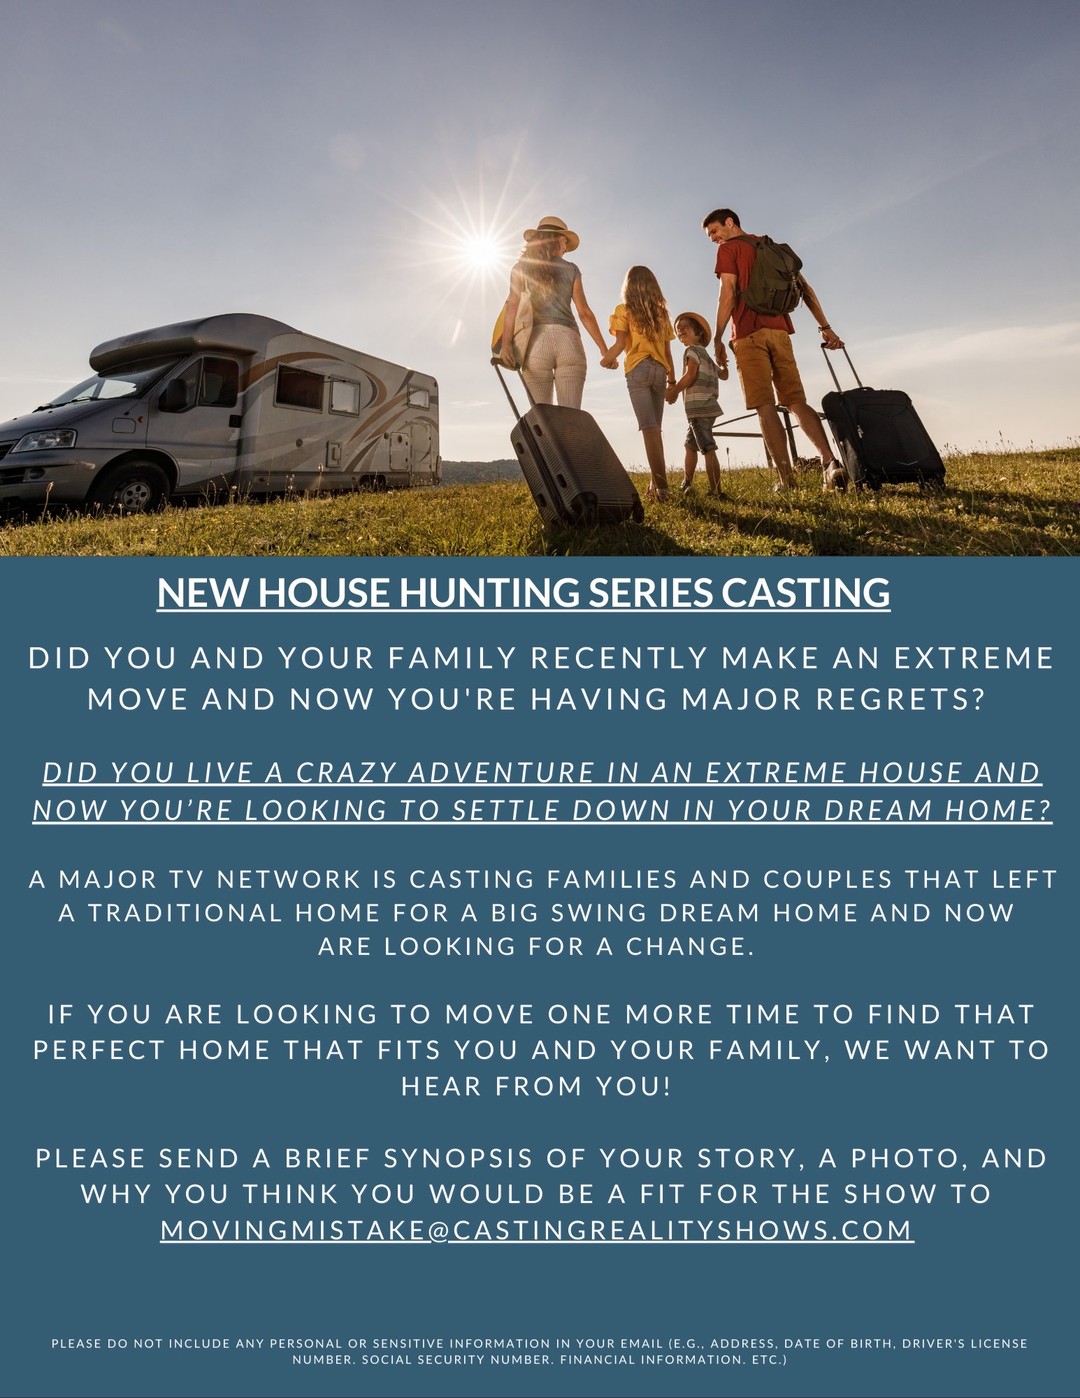 New House Hunting Series Casting: Are You Ready for a Change?